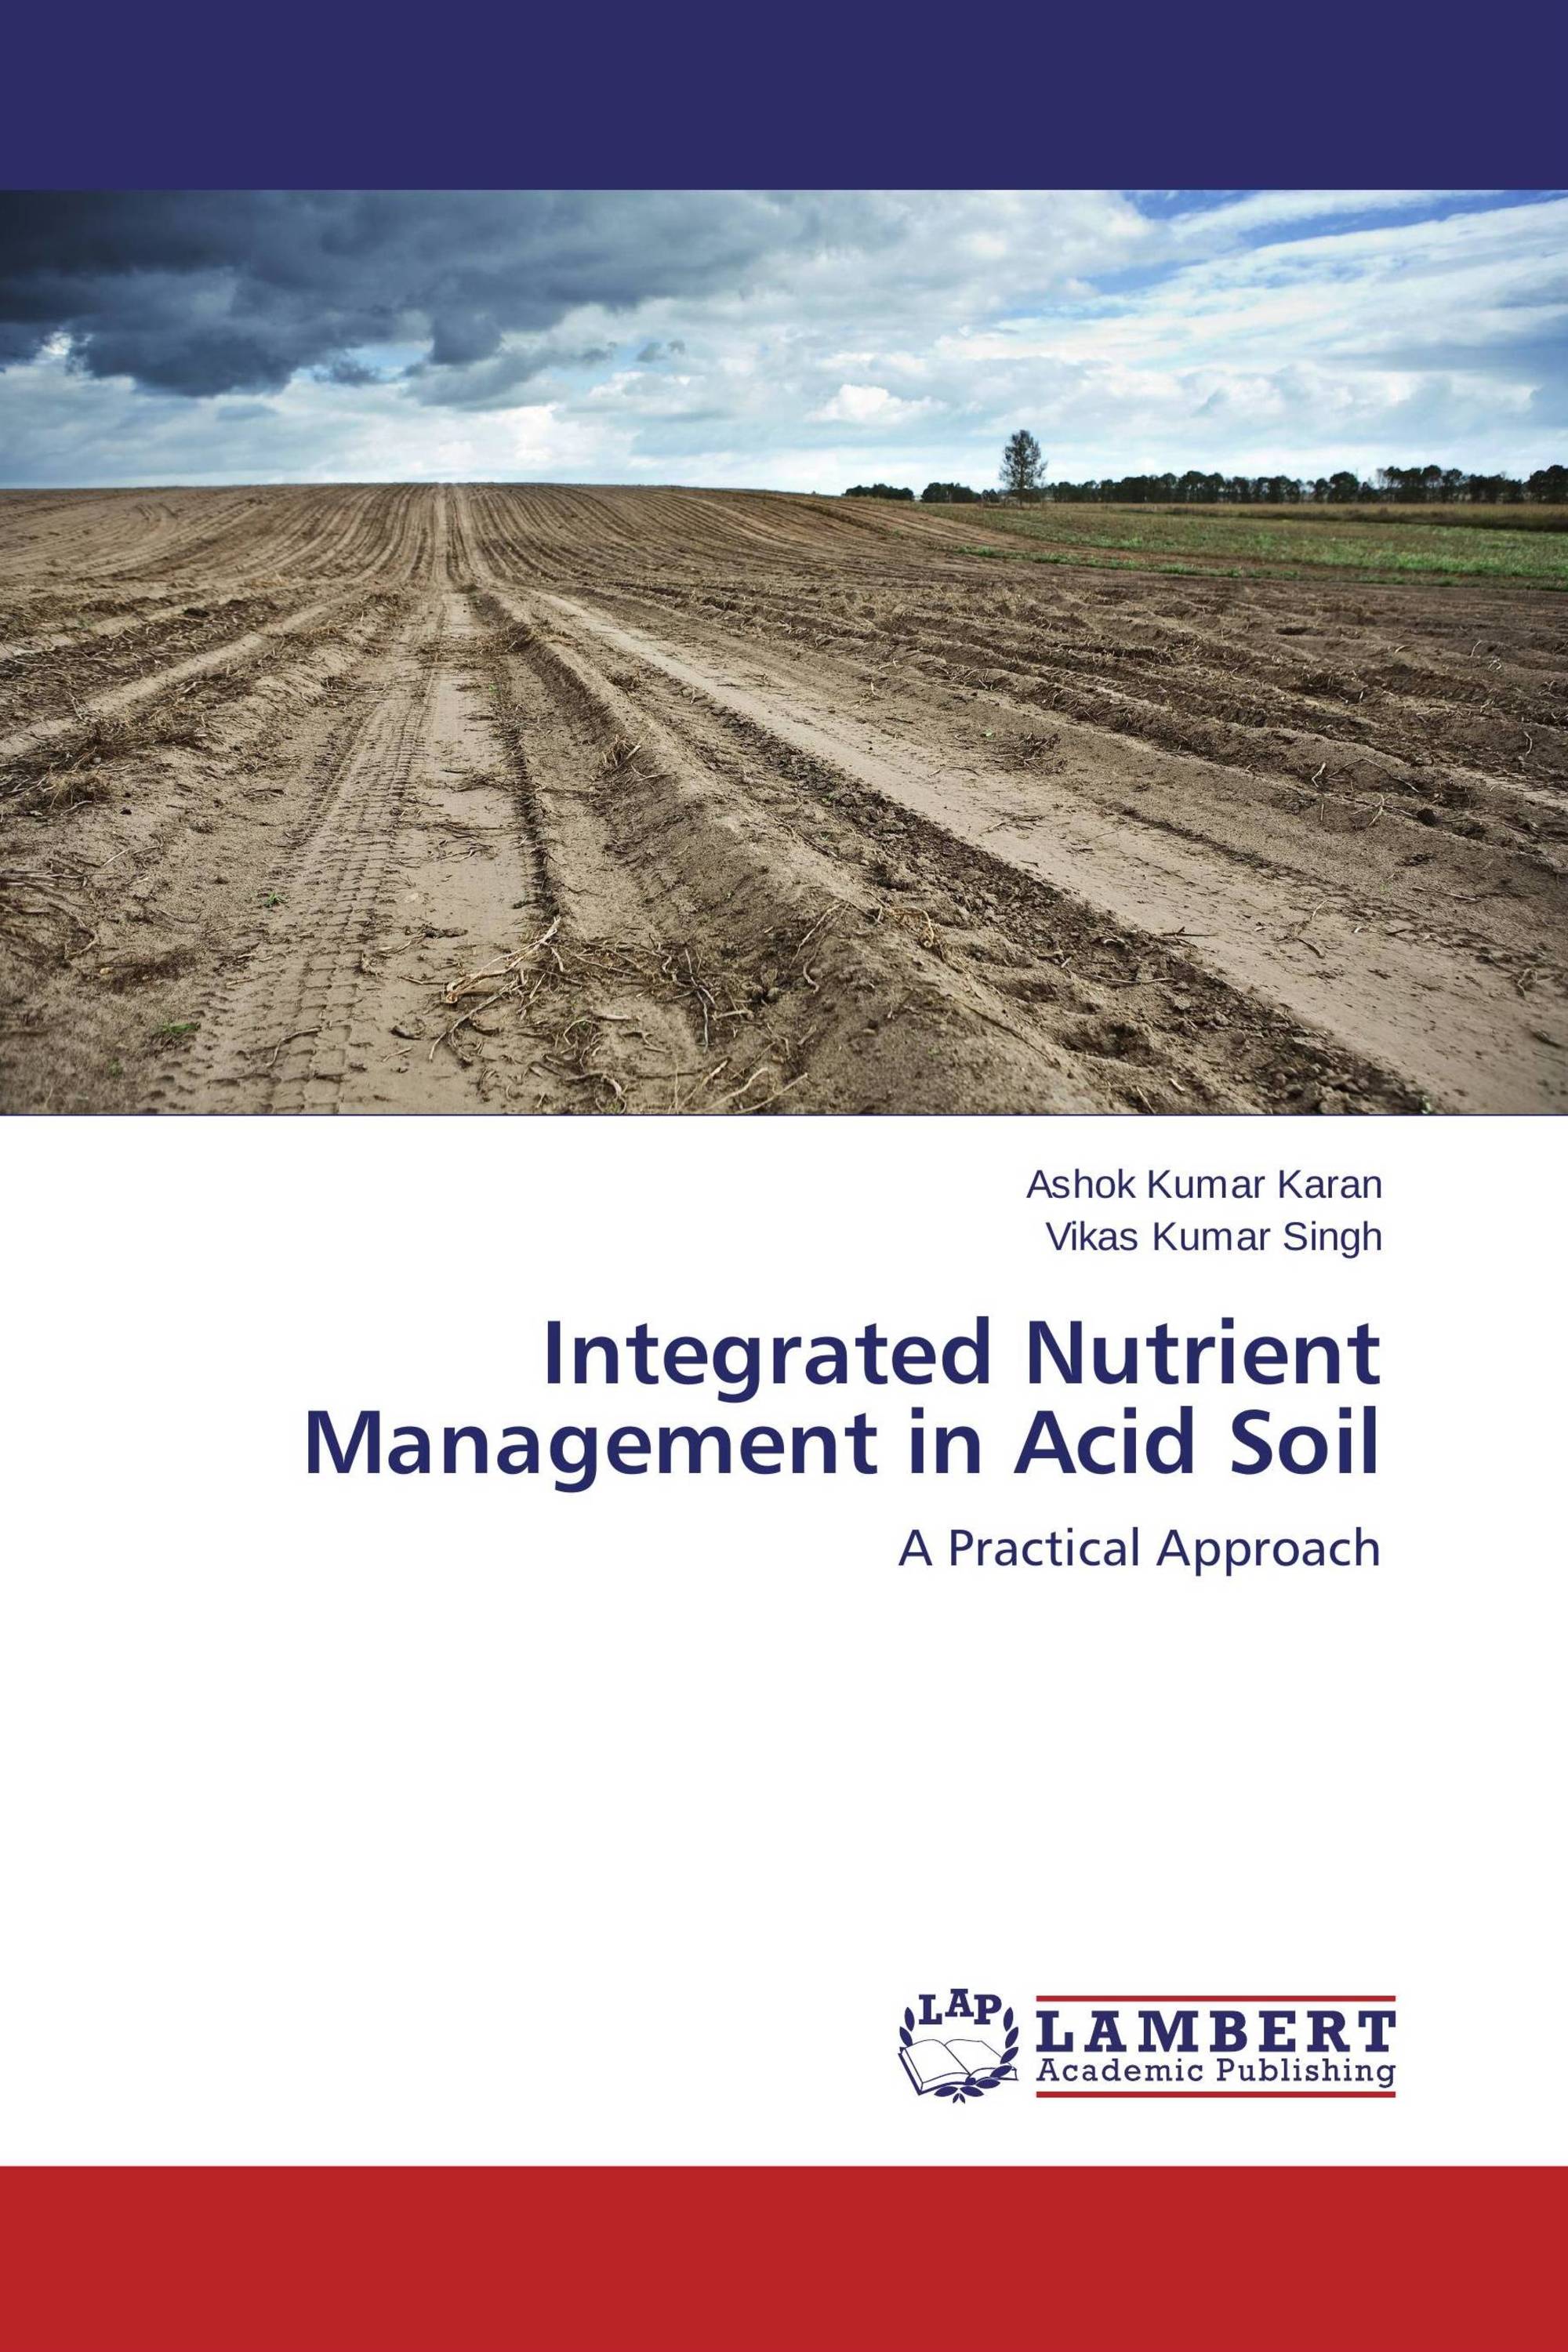 Thesis on integrated nutrient management